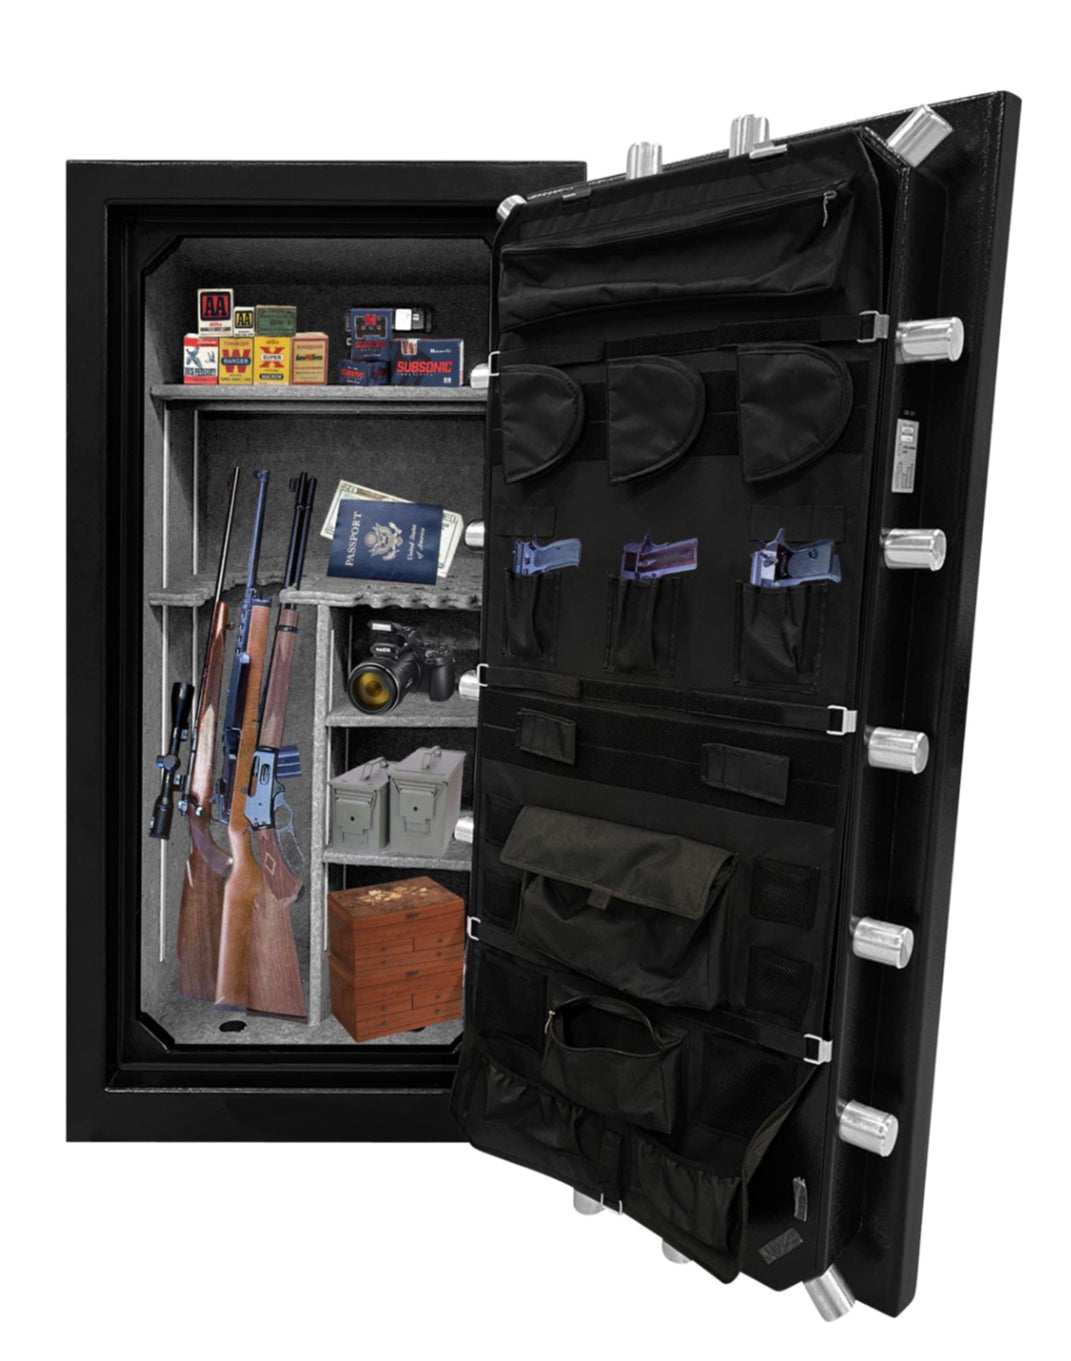 New legislation dealing with the storage of Guns in a gun safe